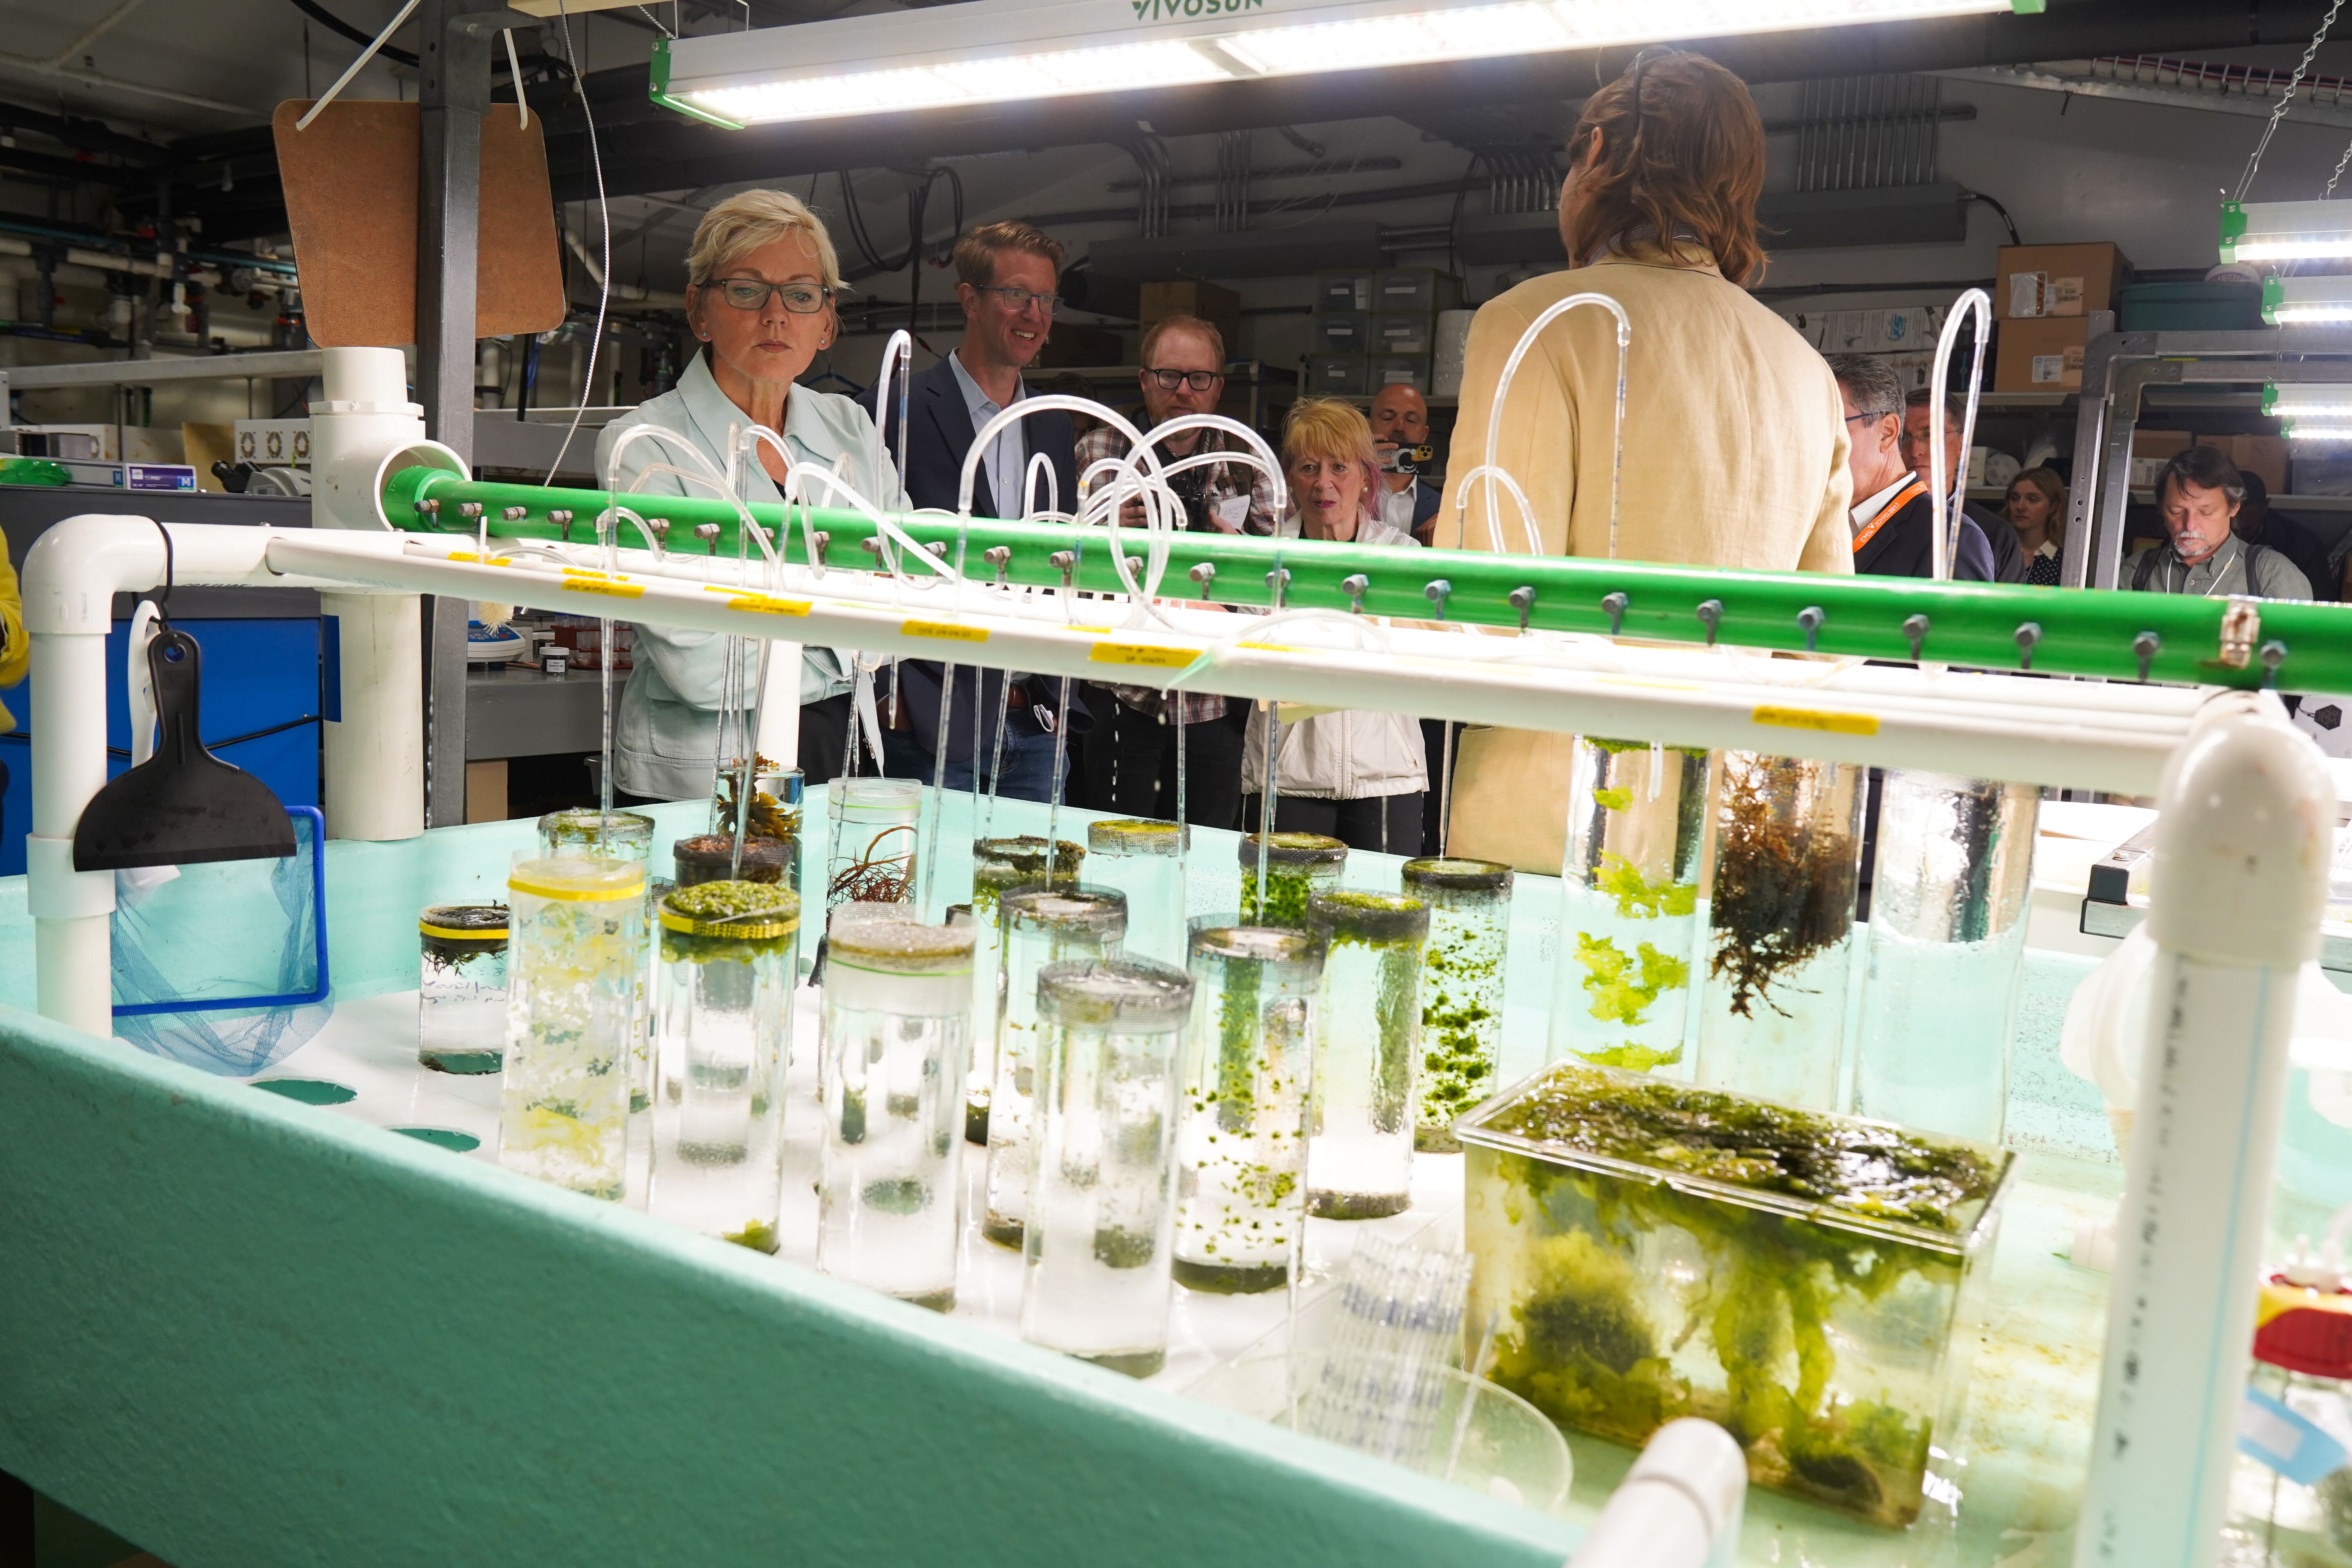 Photo of Department of Energy Secretary Jennifer Granholm, along with Representative Derek Kilmer, and Geri Richmond, DOE Under Secretary for Science and Innovation, learning about PNNL’s algae research during their tour of the PNNL-Sequim campus in 2022.